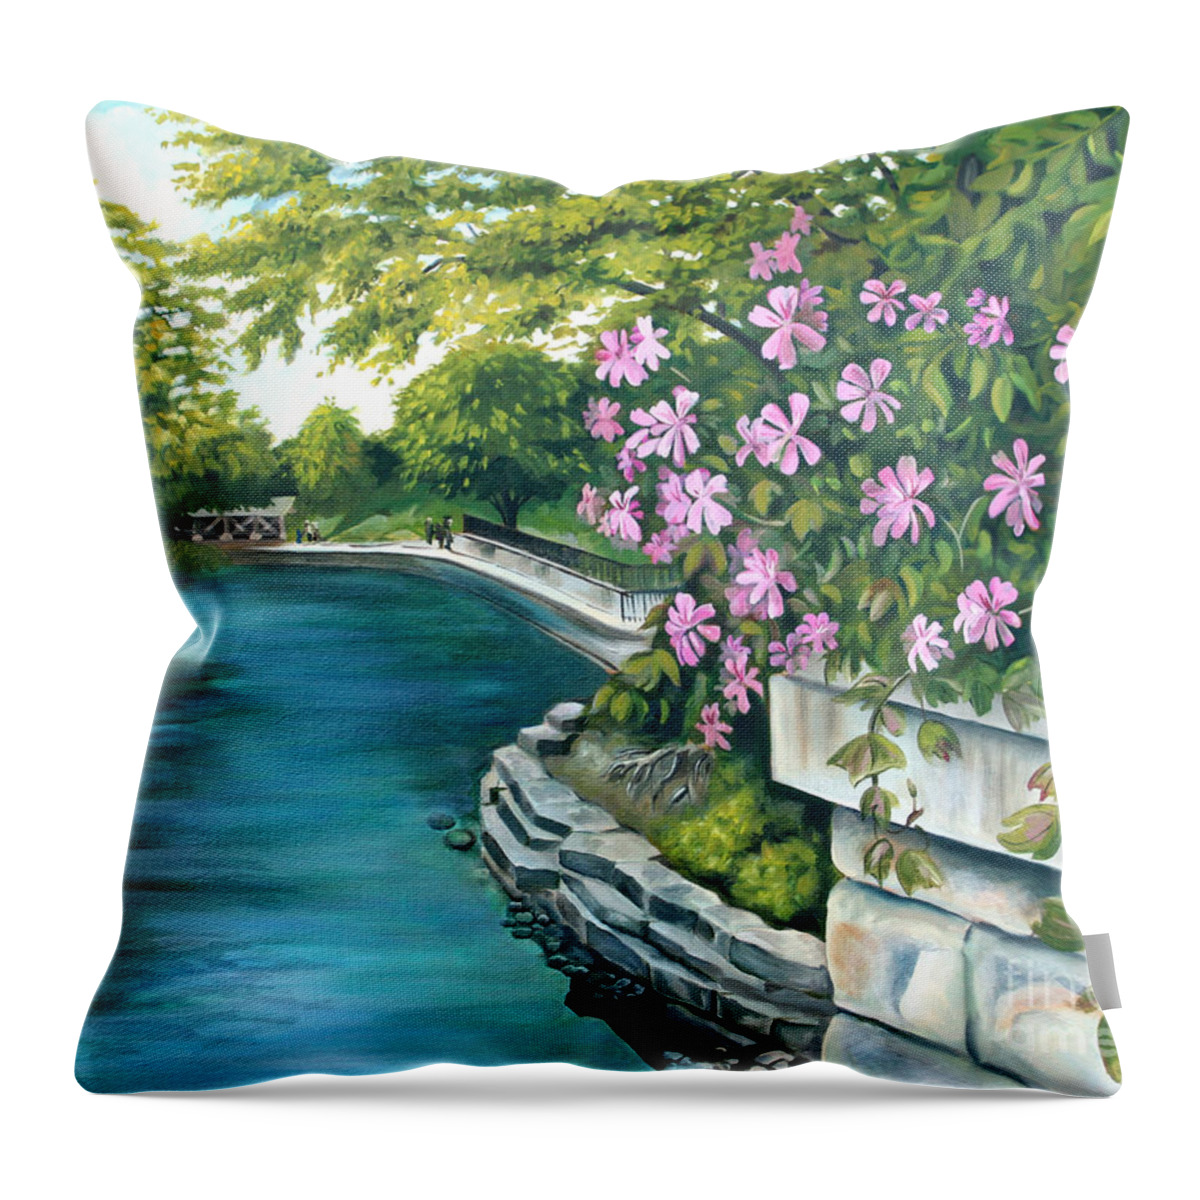 Landscape Throw Pillow featuring the painting Naperville Riverwalk by Debbie Hart